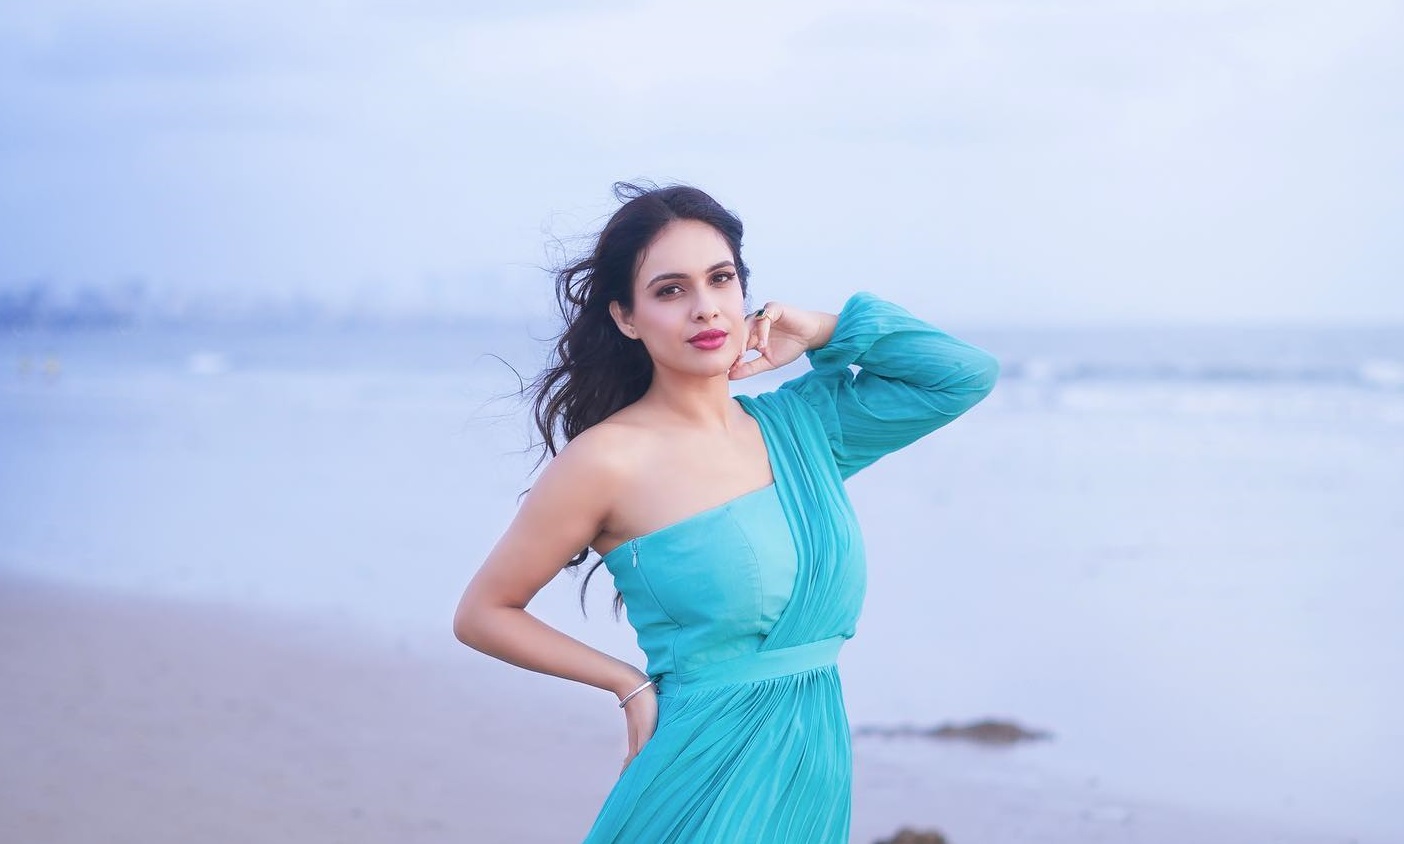 Pic Talk Neha Malik most recent photoshoot at the ocean side, fans went off the deep end seeing her ravishing looks